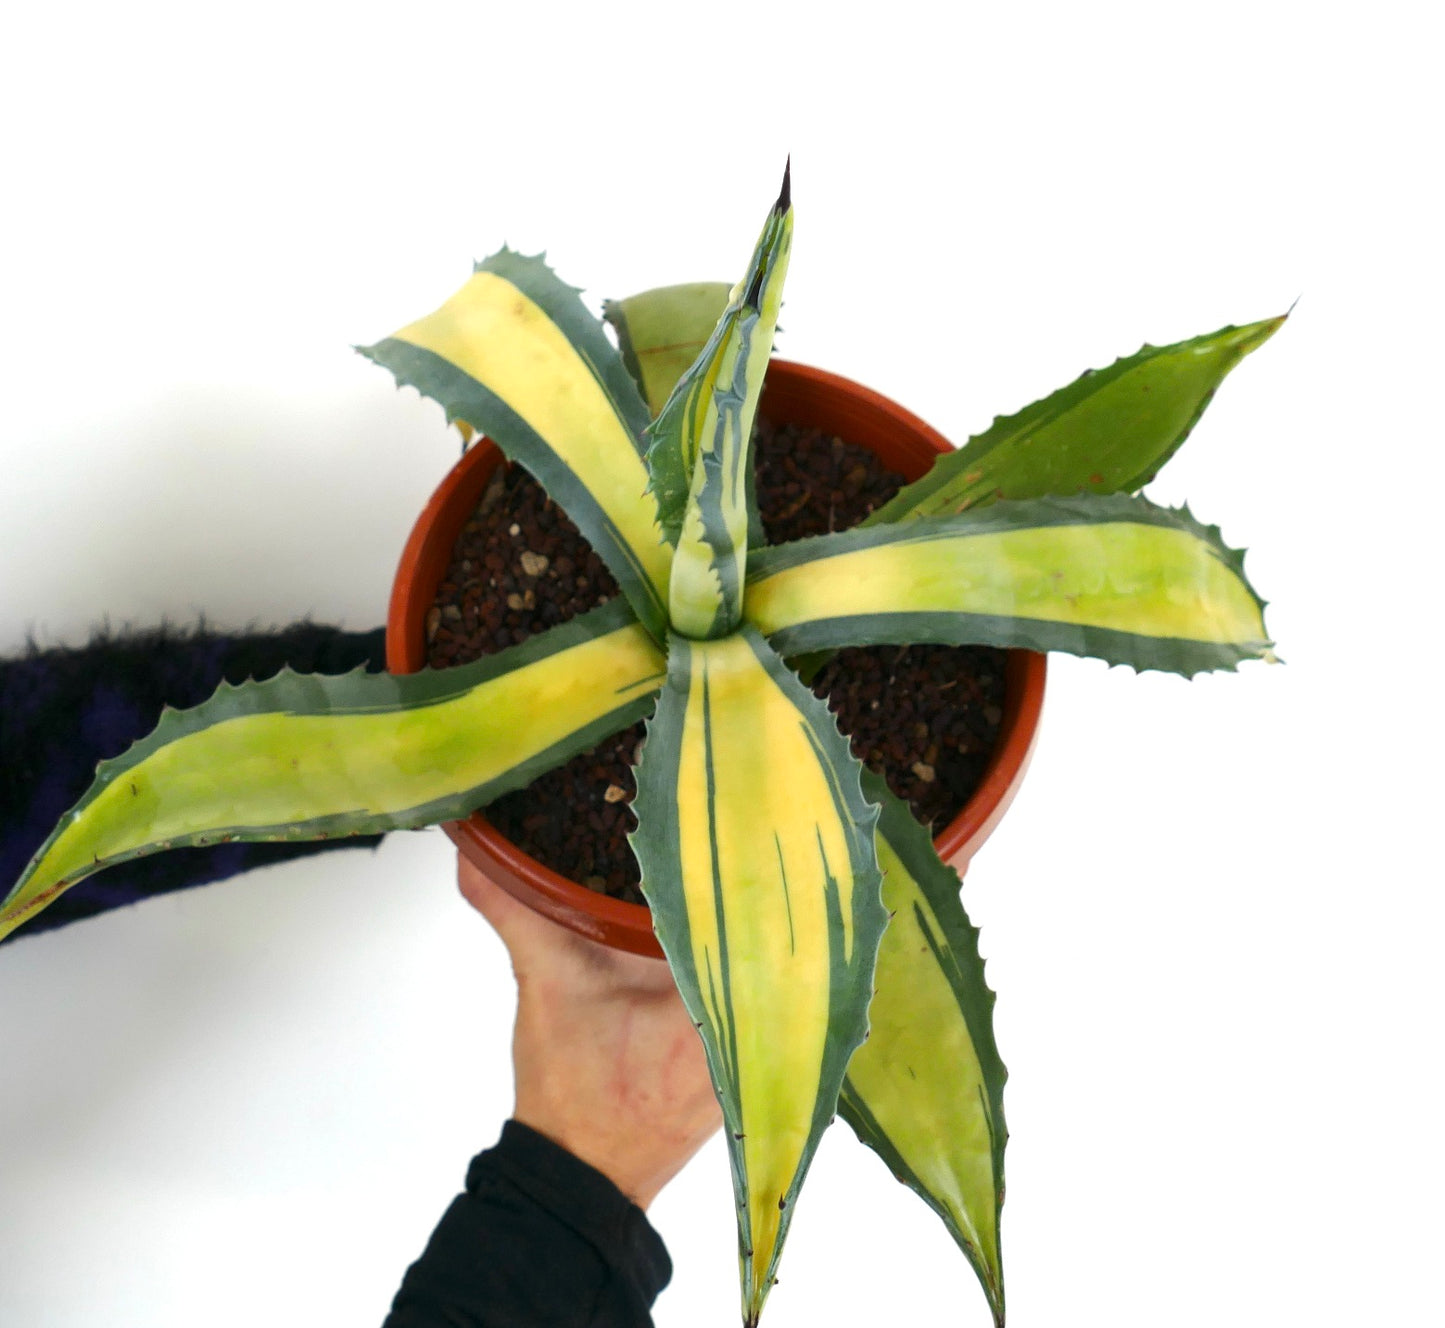 Agave americana MEDIOPICTA YELLOW VARIEGATED F5L